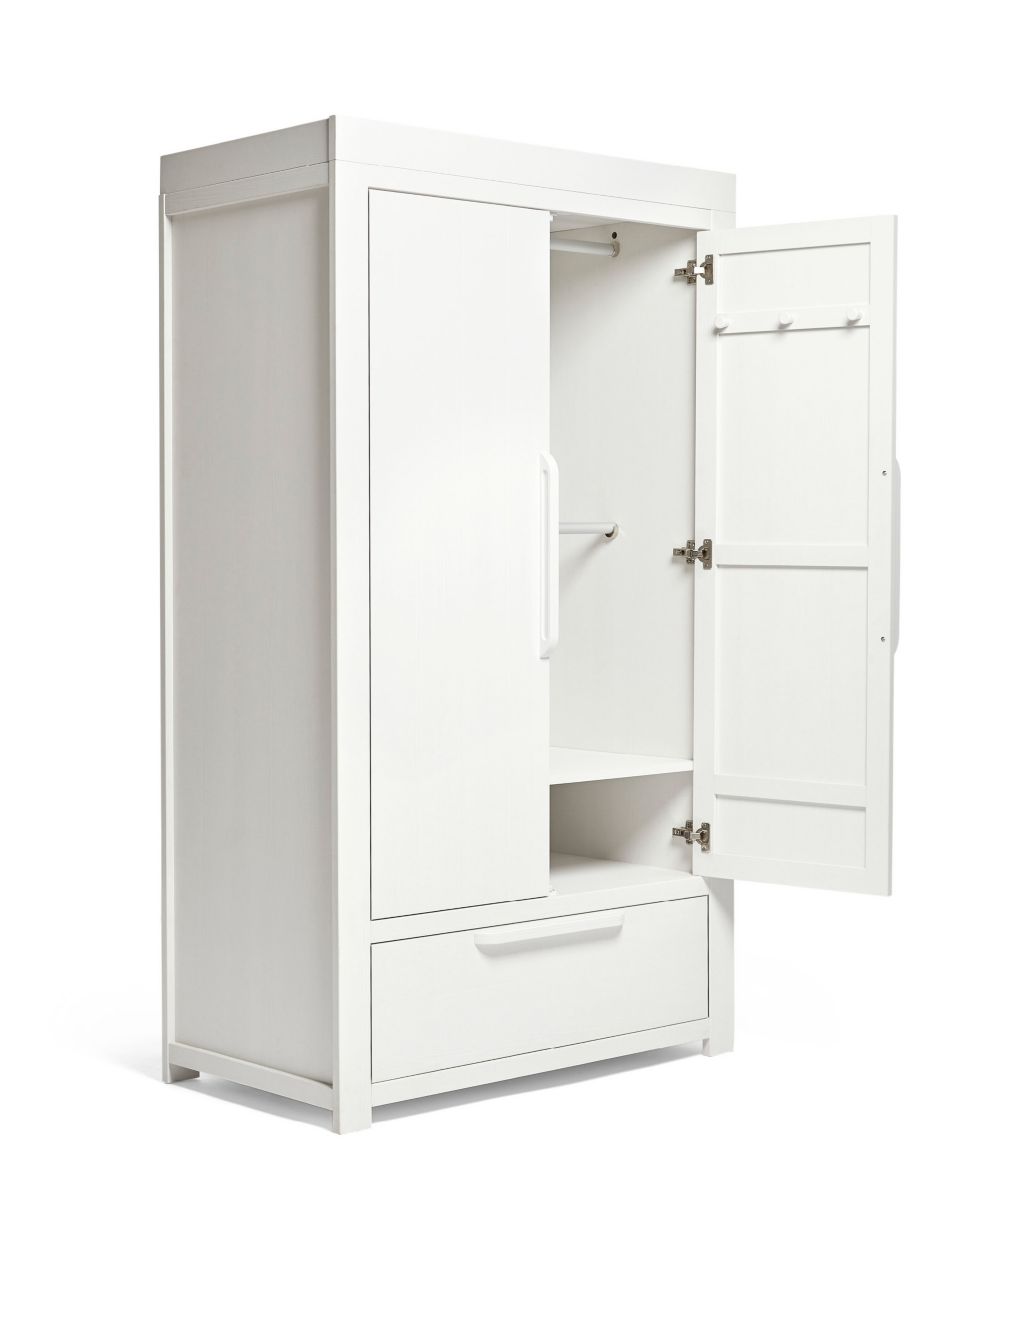 Franklin 3 Piece Cotbed Range with Dresser and Wardrobe image 8